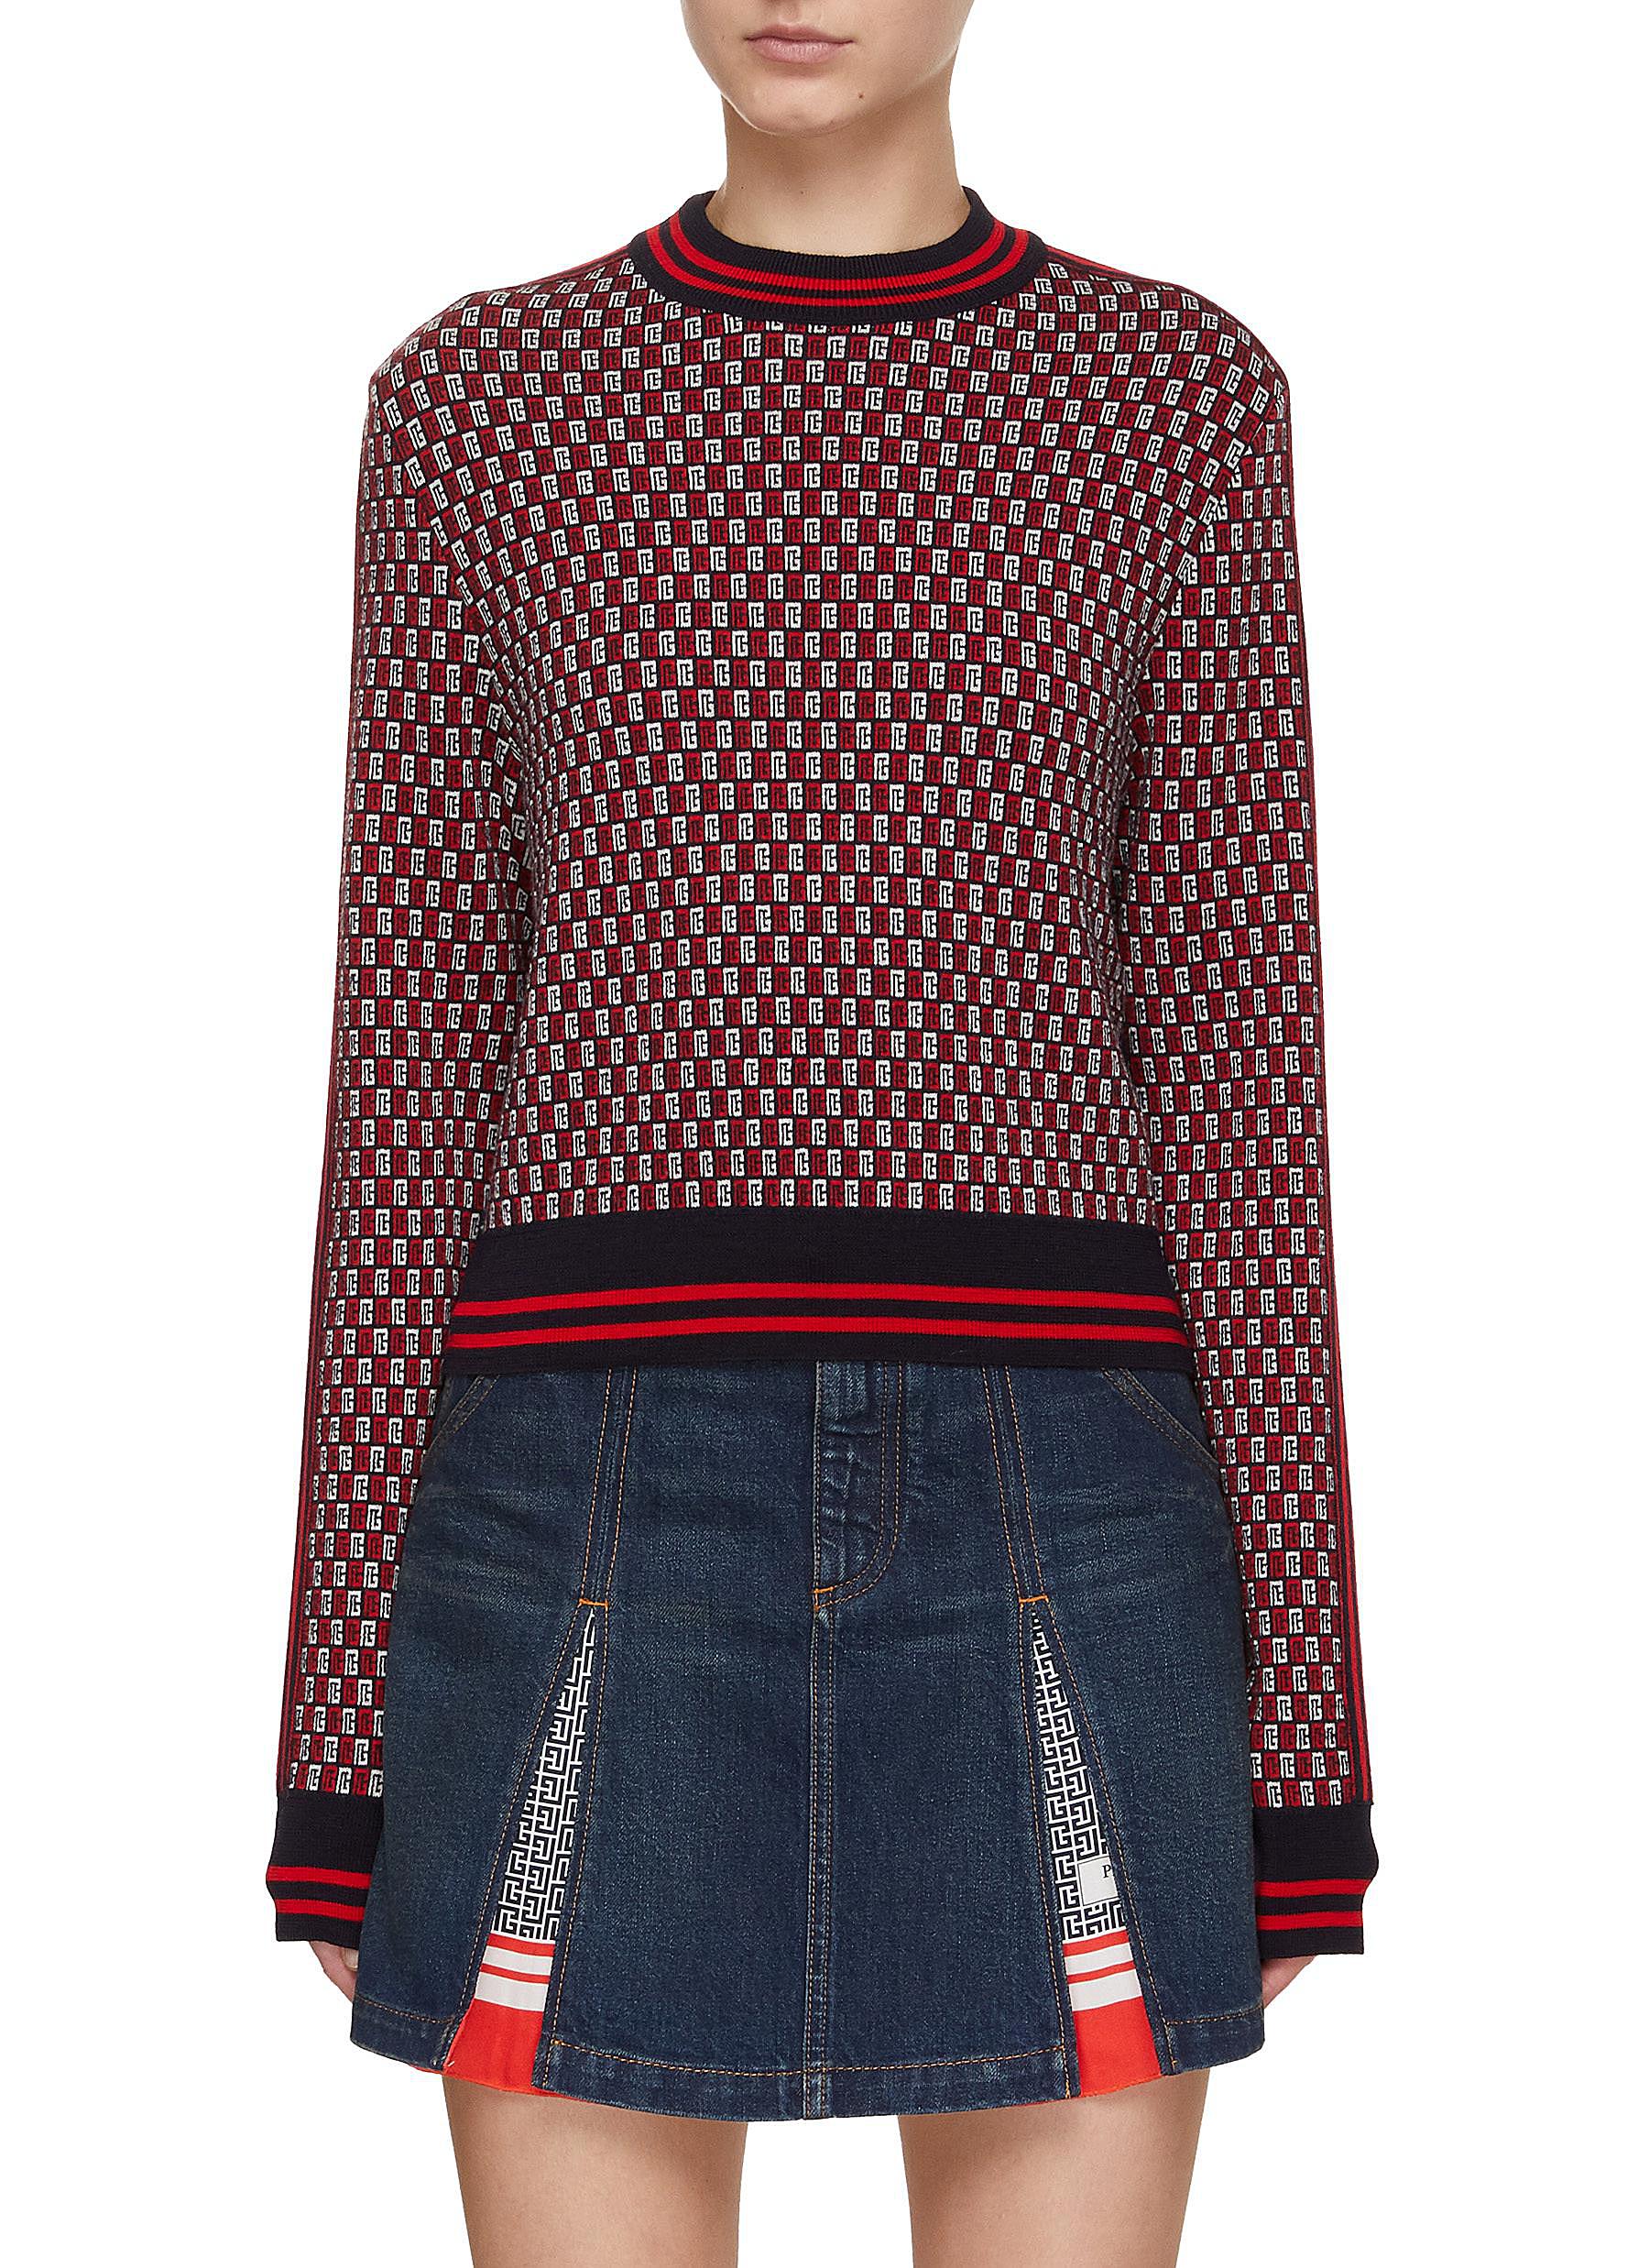 Balmain Short Sweater In Monogrammed Knit In Red